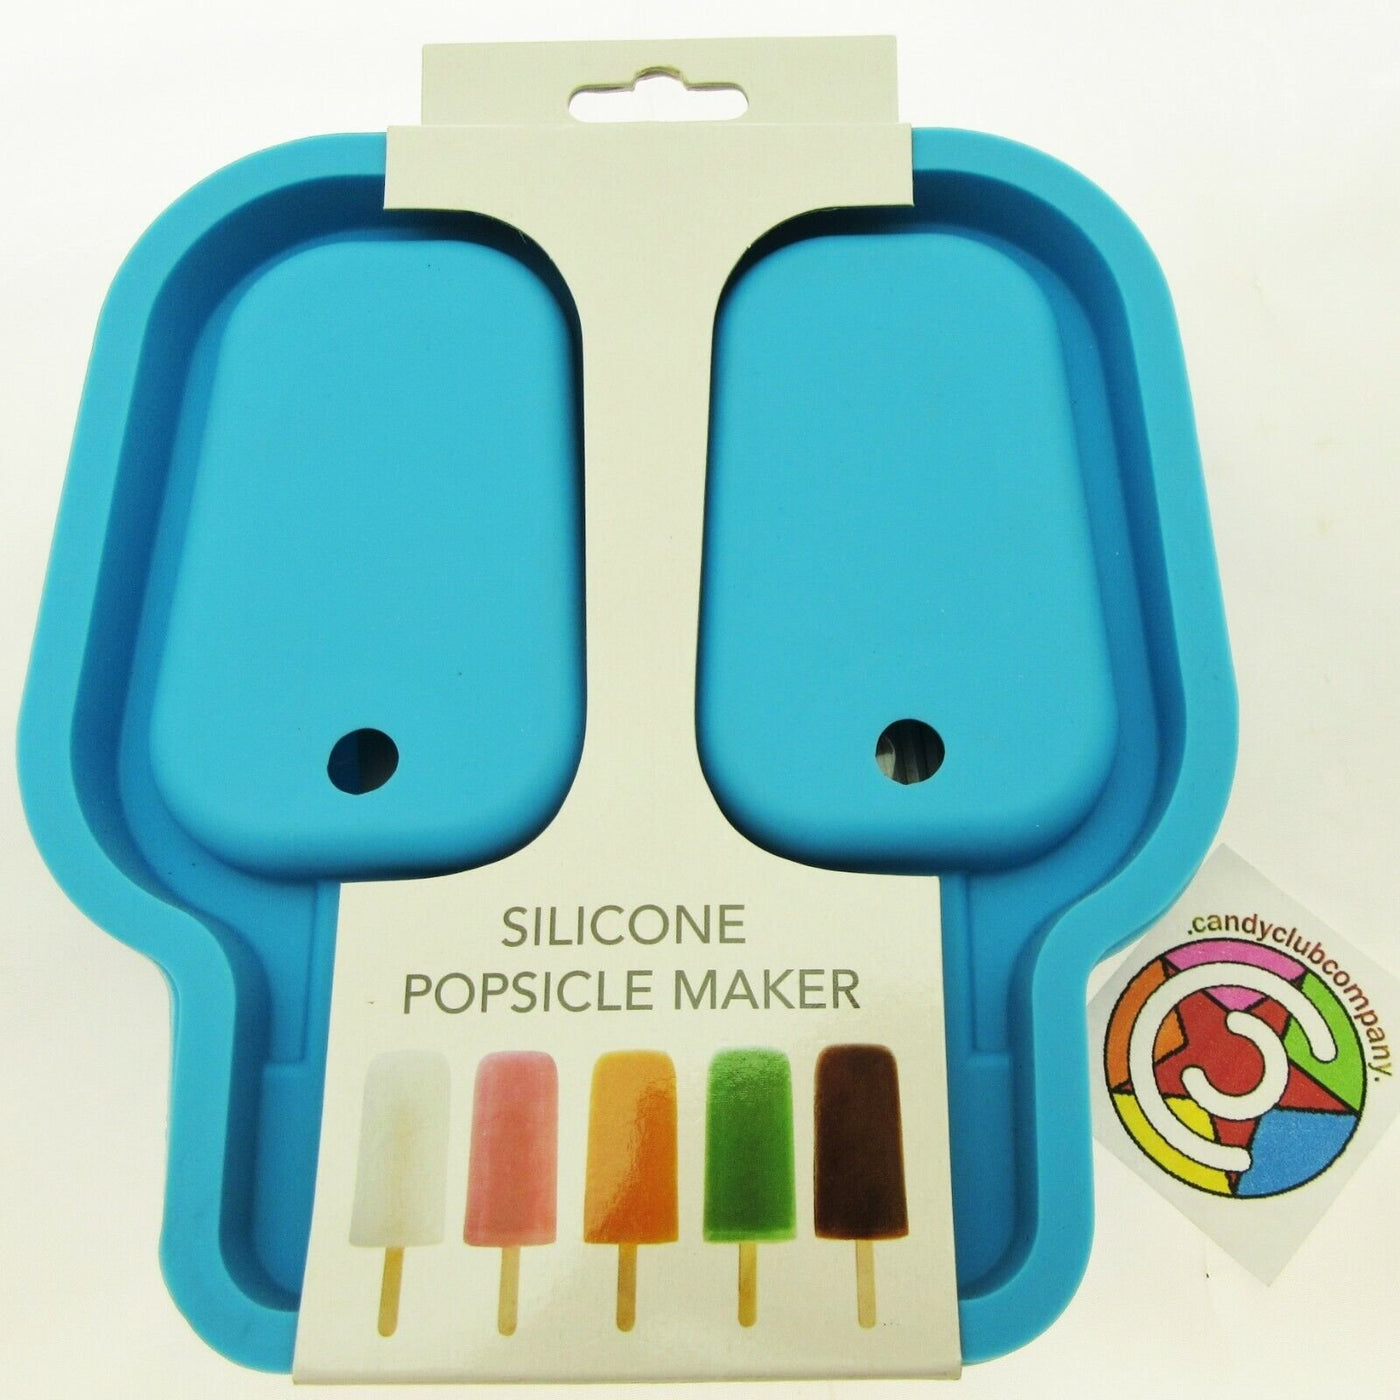 Silicone Popsicle Maker Tray ~ Sticks Included Flexible ~ By Kolorae - Blue